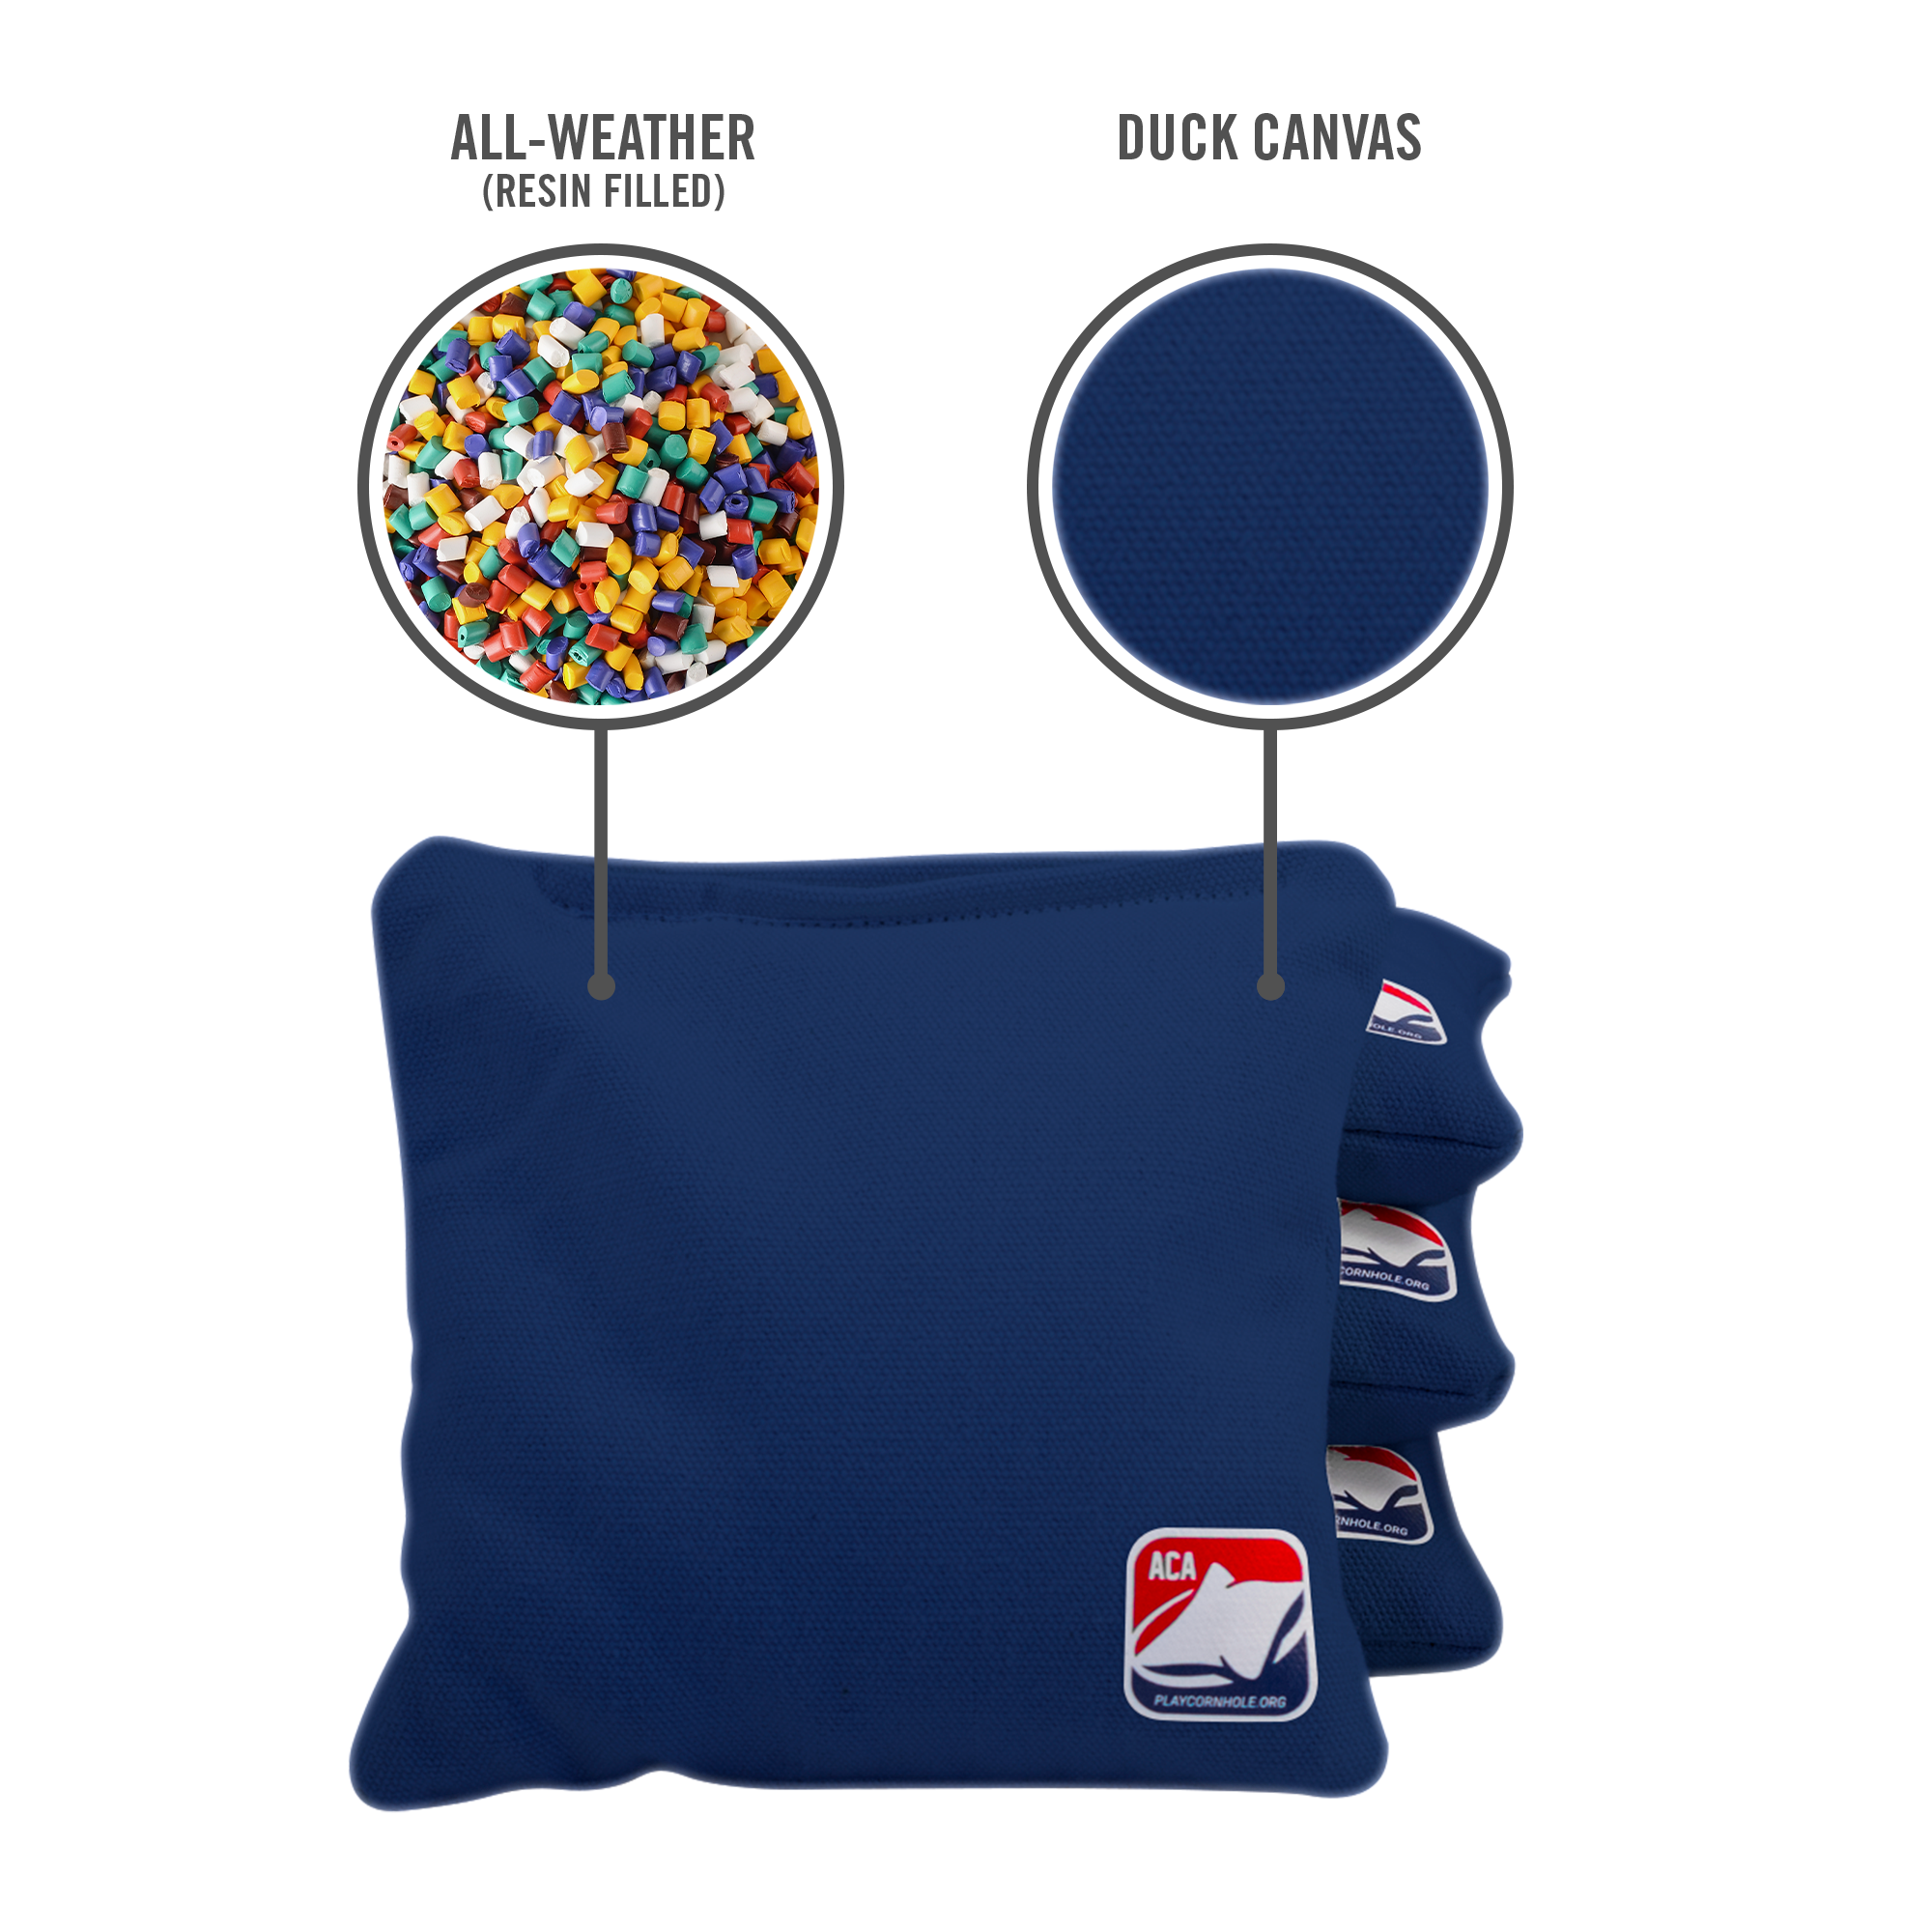 6-in Daily 66x Navy Blue Competition Regulation Cornhole Bags